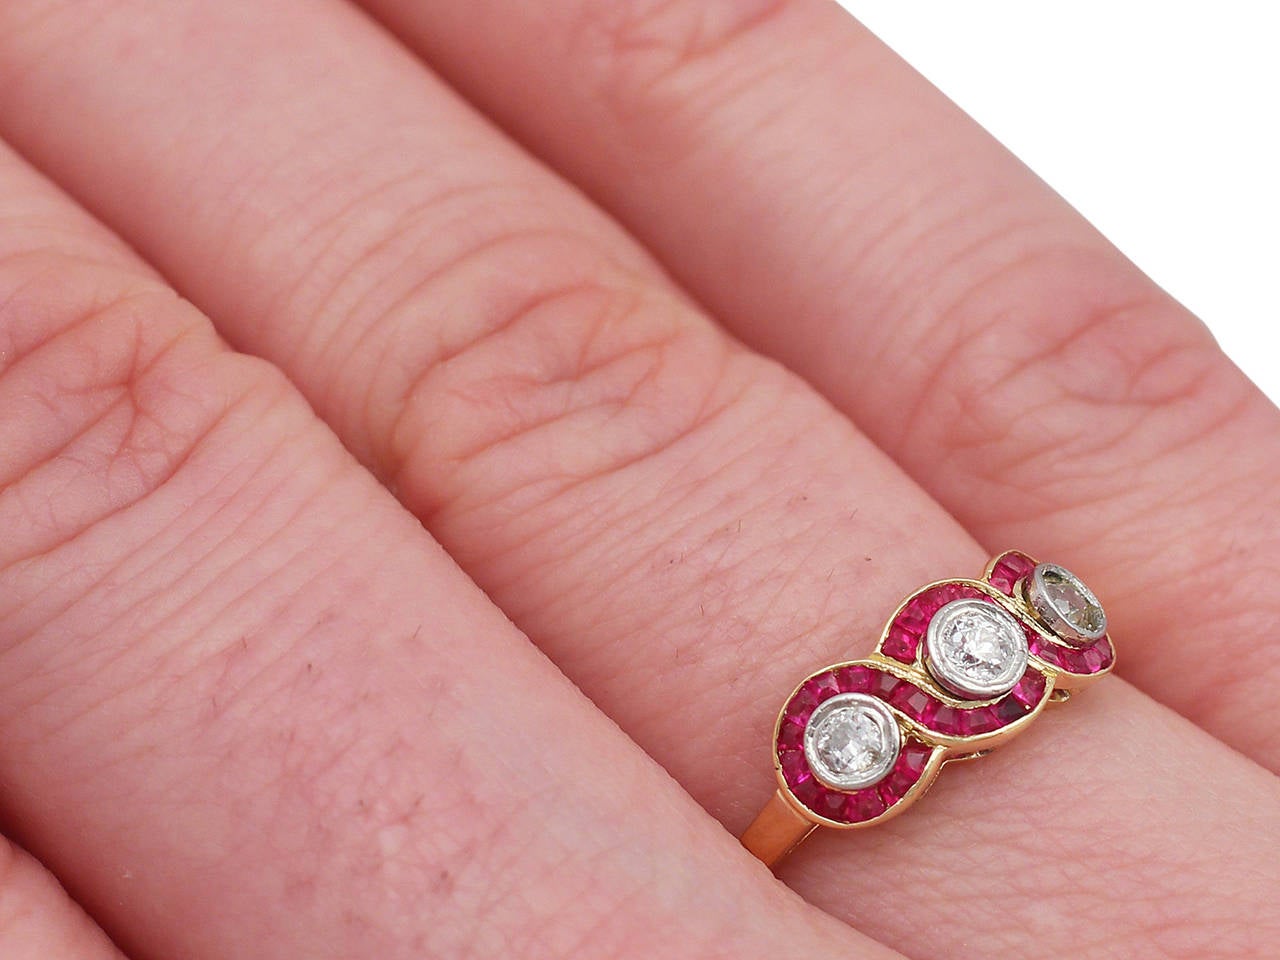 0.32Ct Diamond & 0.33Ct Ruby, 18k Yellow Gold Dress Ring - Antique French 4